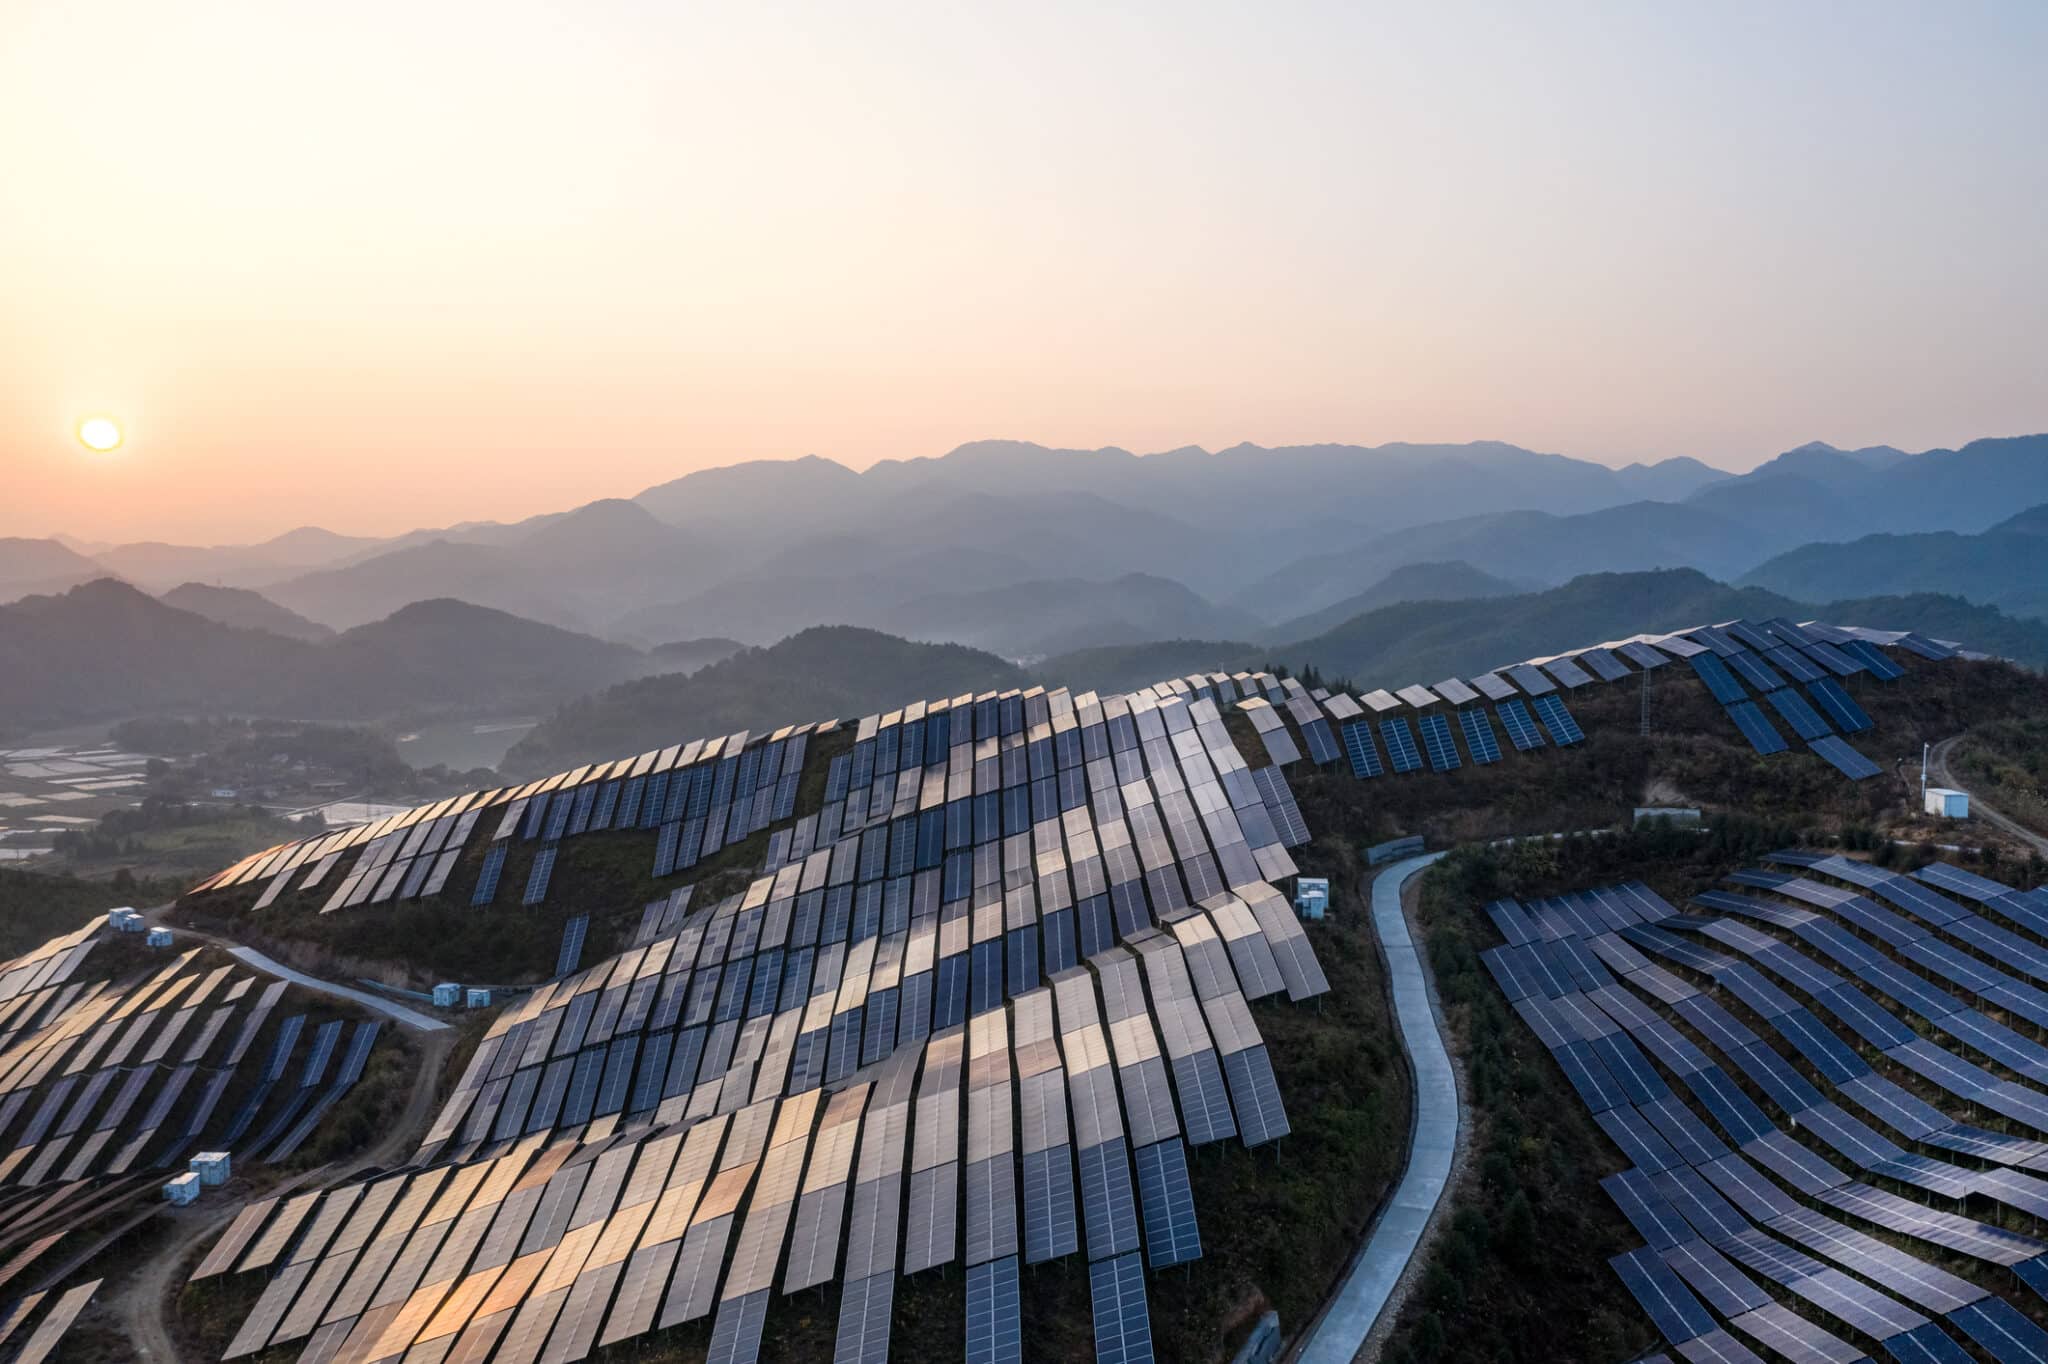 Aerial view of the solar power plant on the top of the mountain at sunset